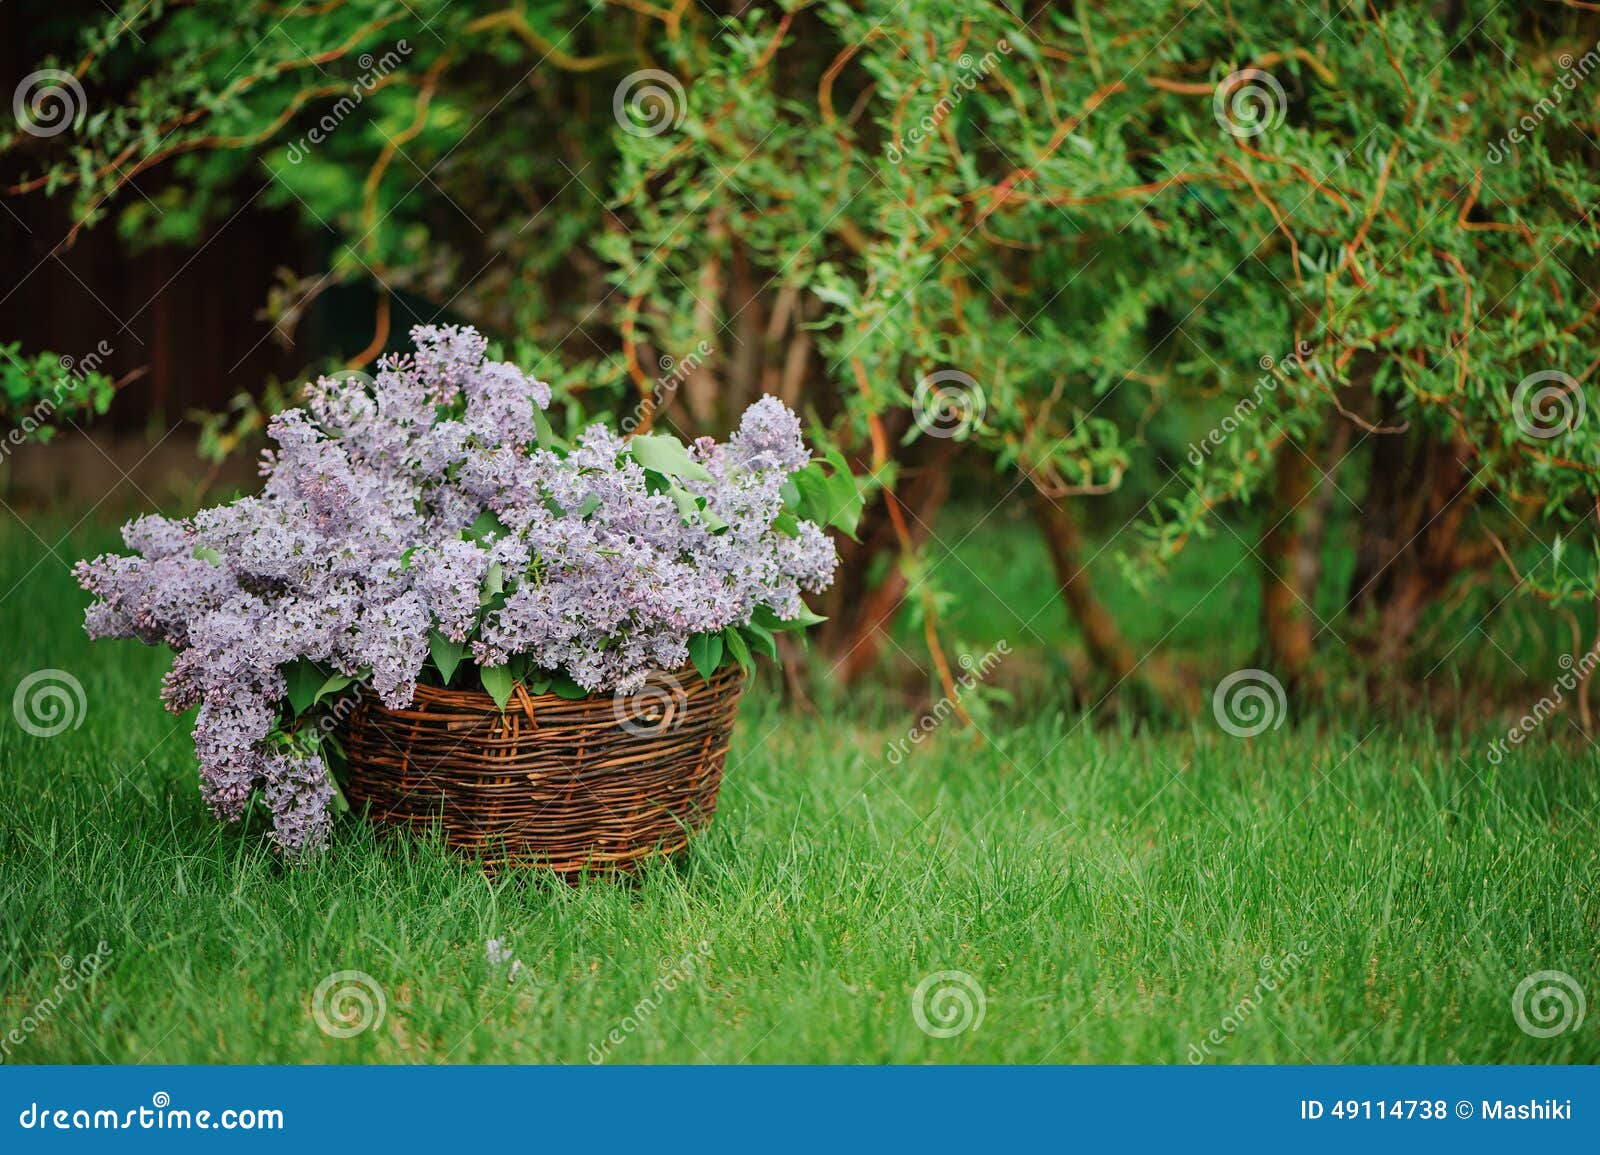 lilacs in basket on the green lawn in spring garden